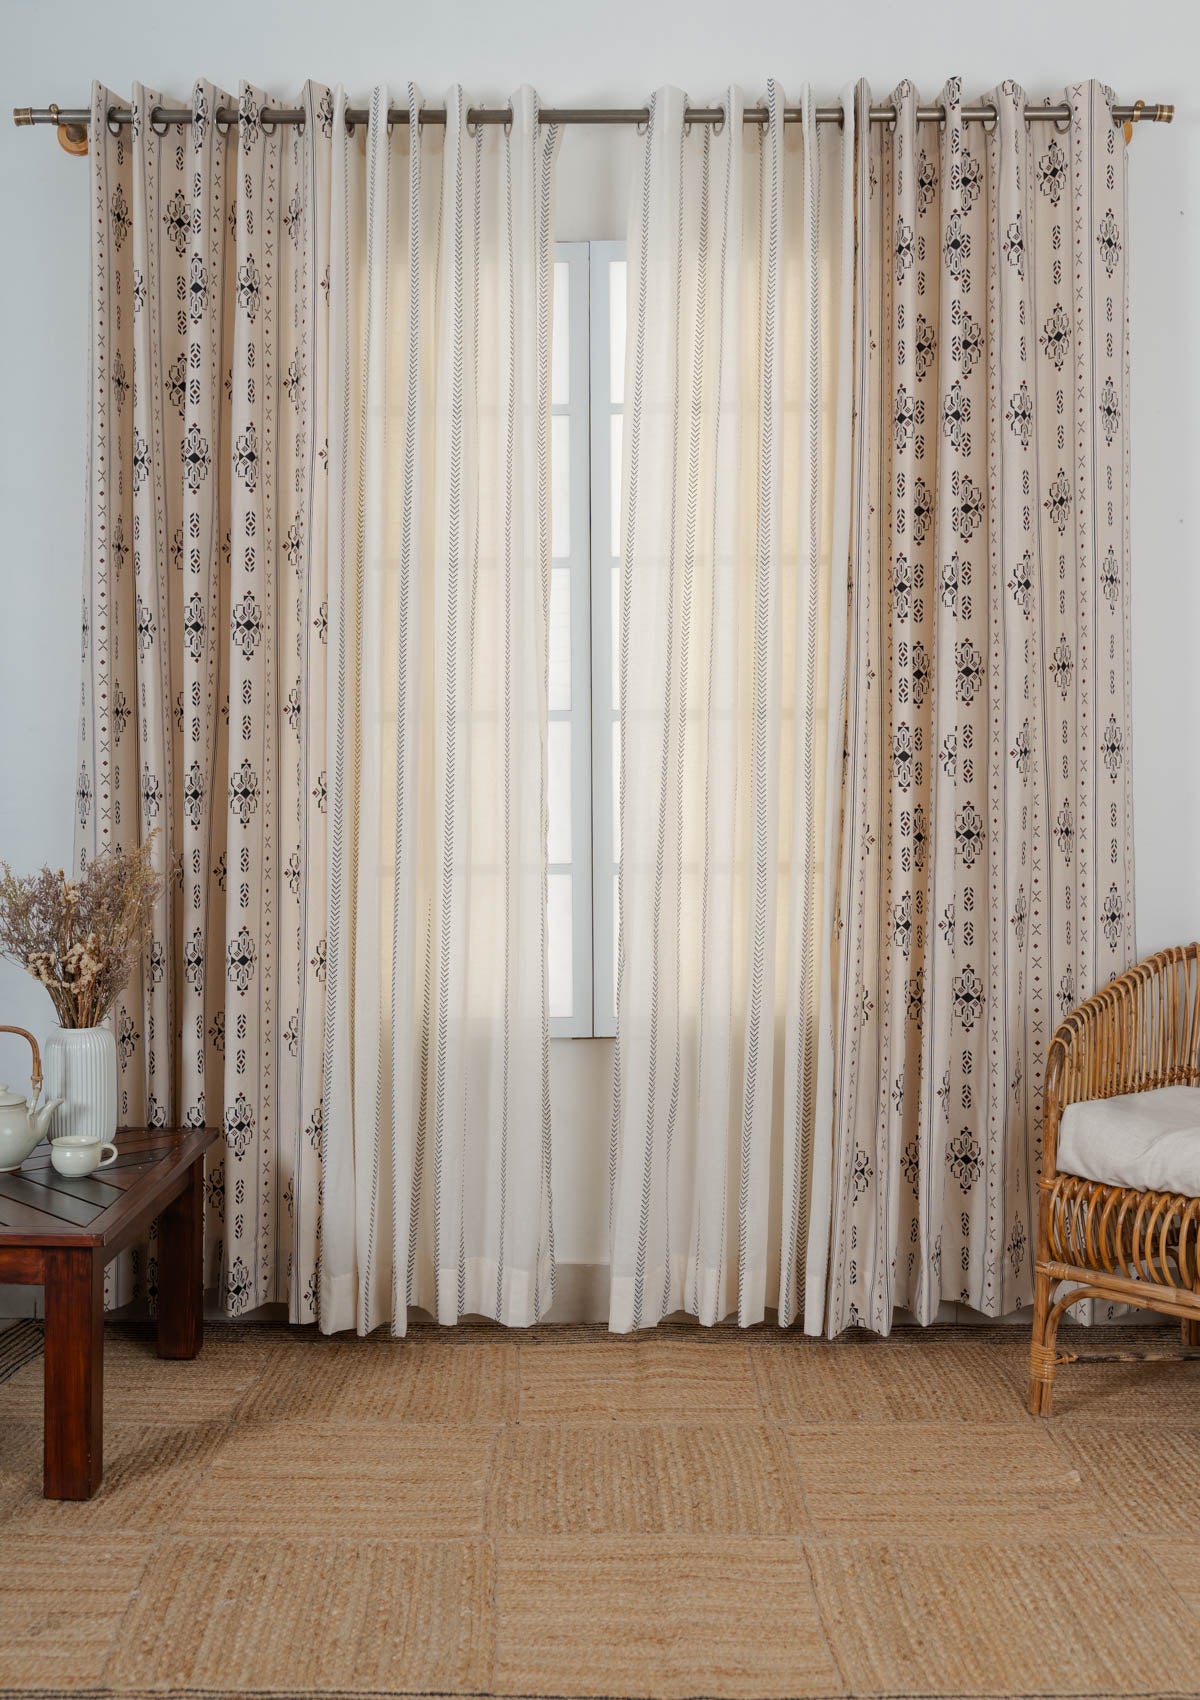 Gypsy floral cotton curtain with Spear geometric sheer 100% cotton curtains for living room - Set of 4